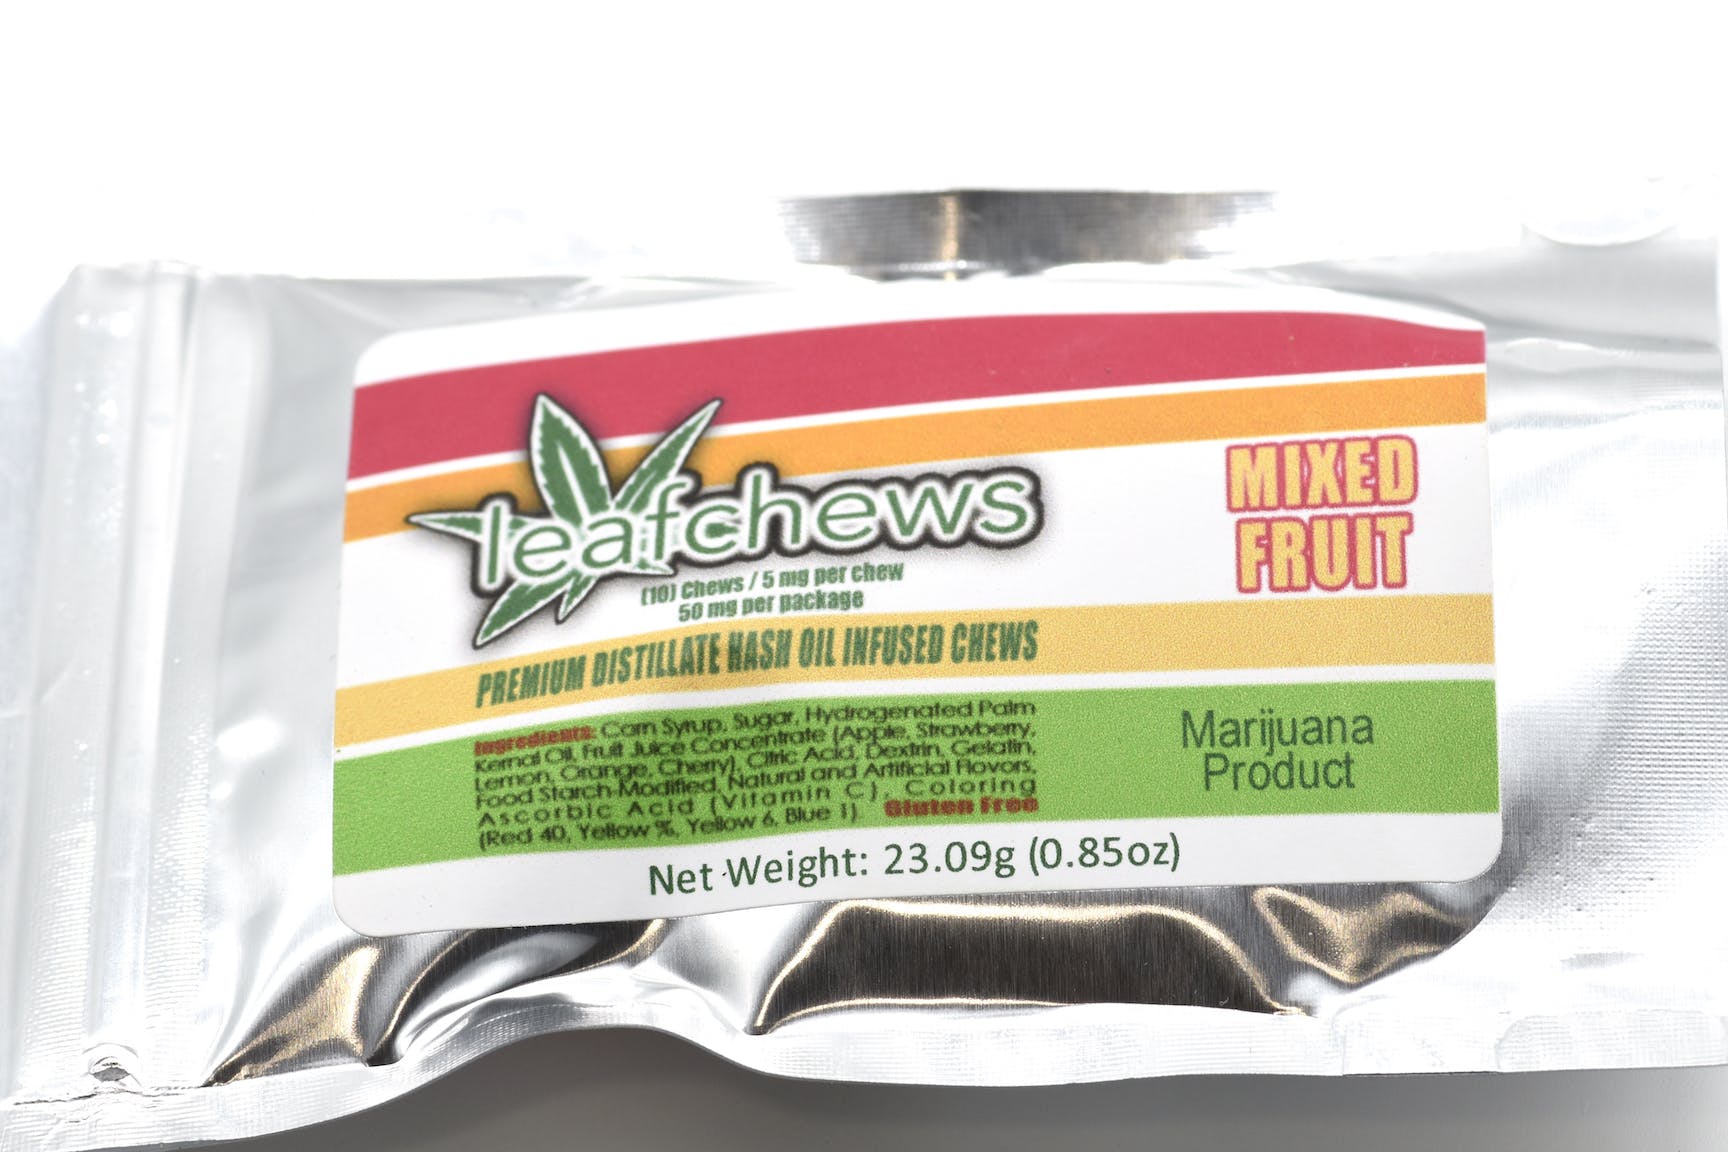 edible-leaf-chews-mixed-fruit-by-einstein-labs